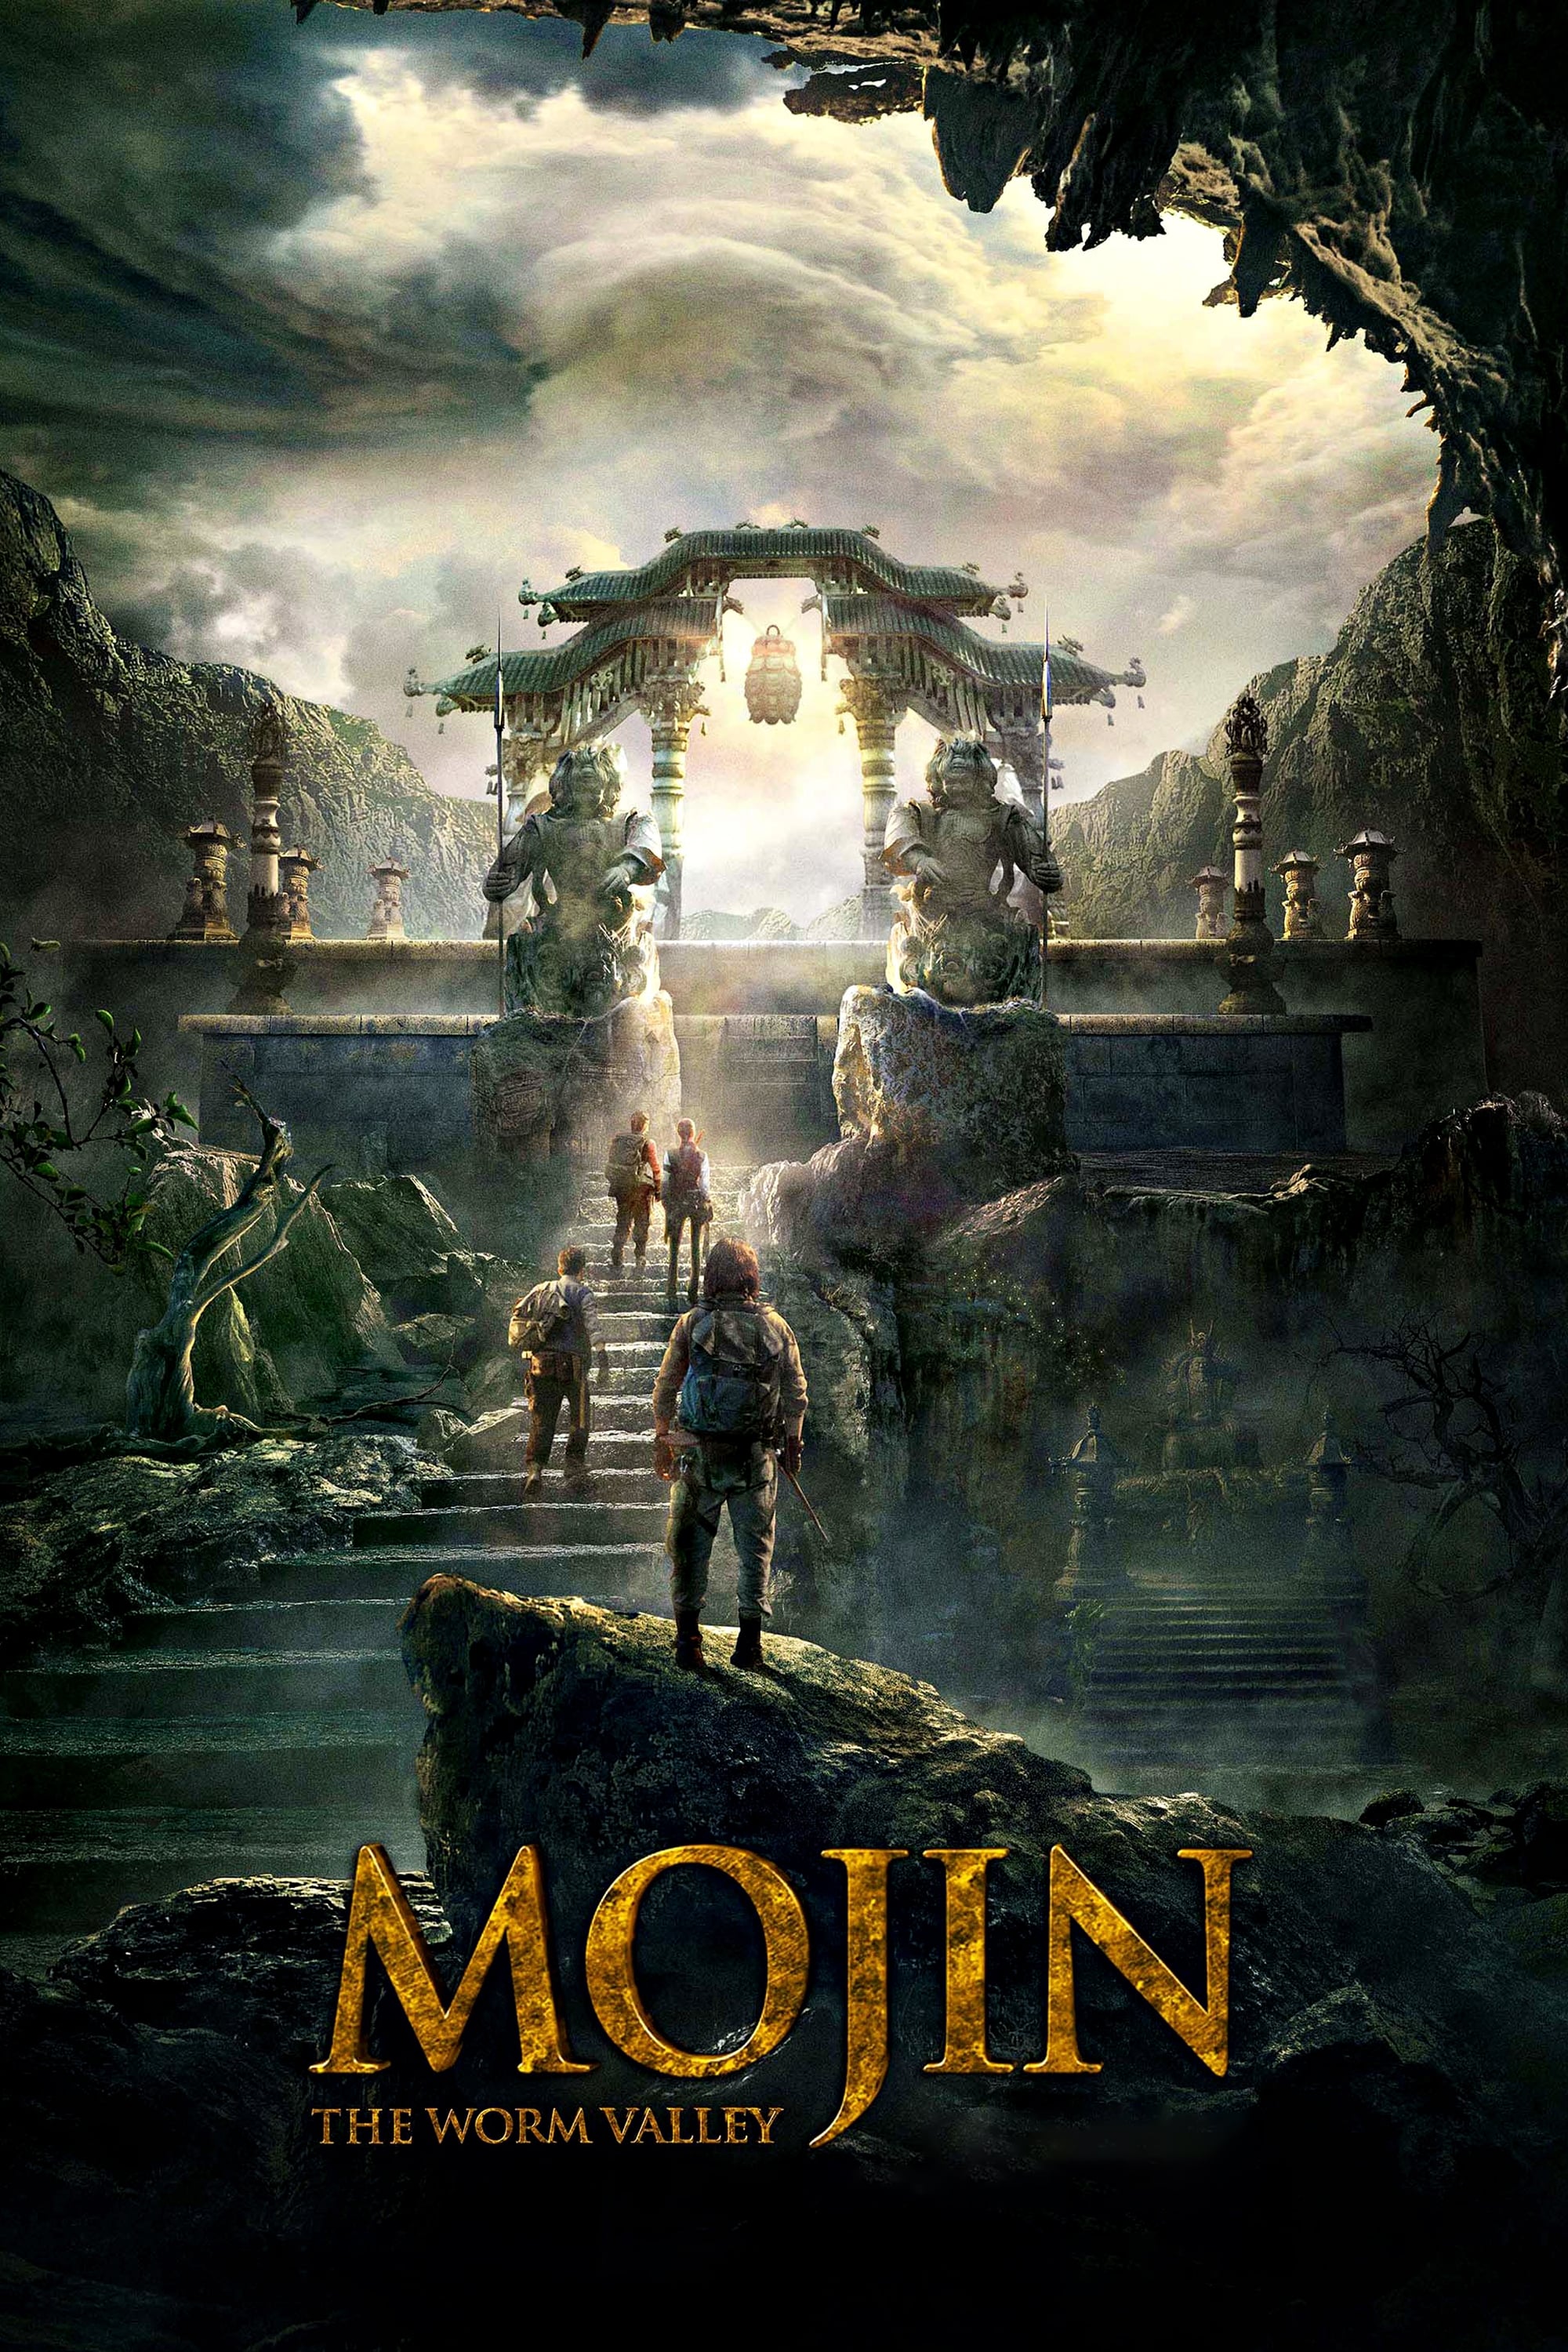 mojin the lost legend full movie online free